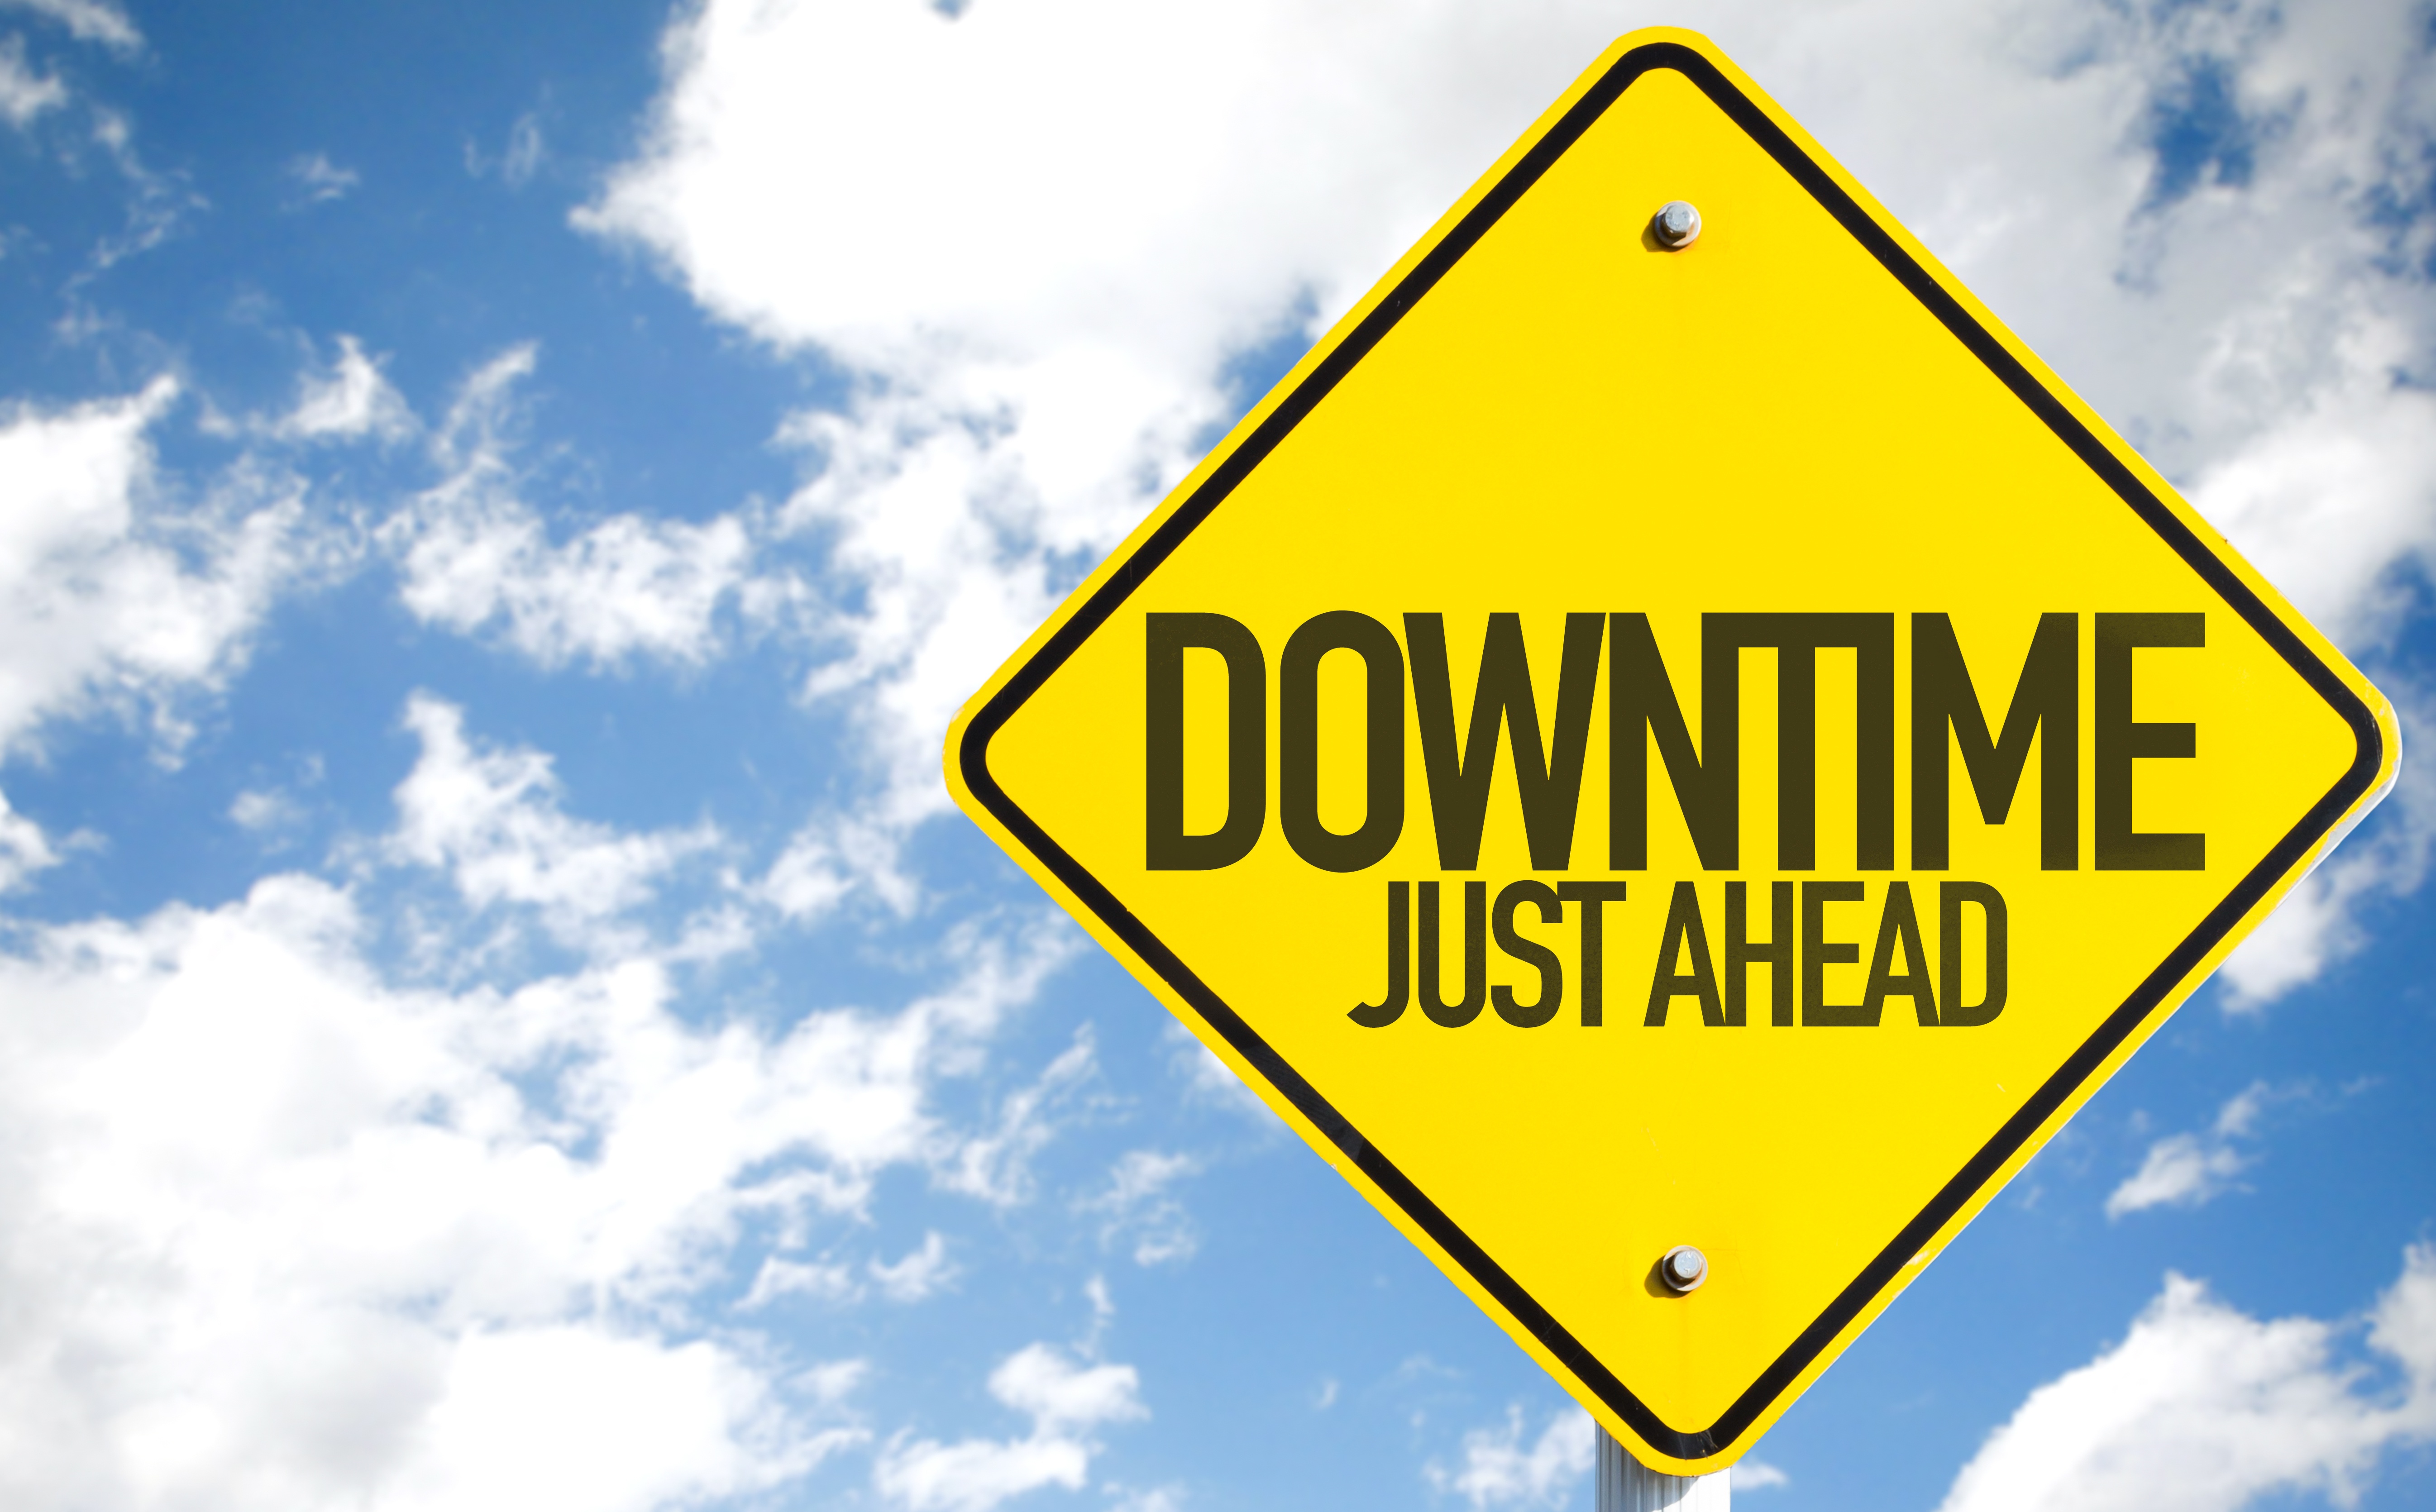 Microsoft Azure Downtime - Is The Cloud Unreliable?